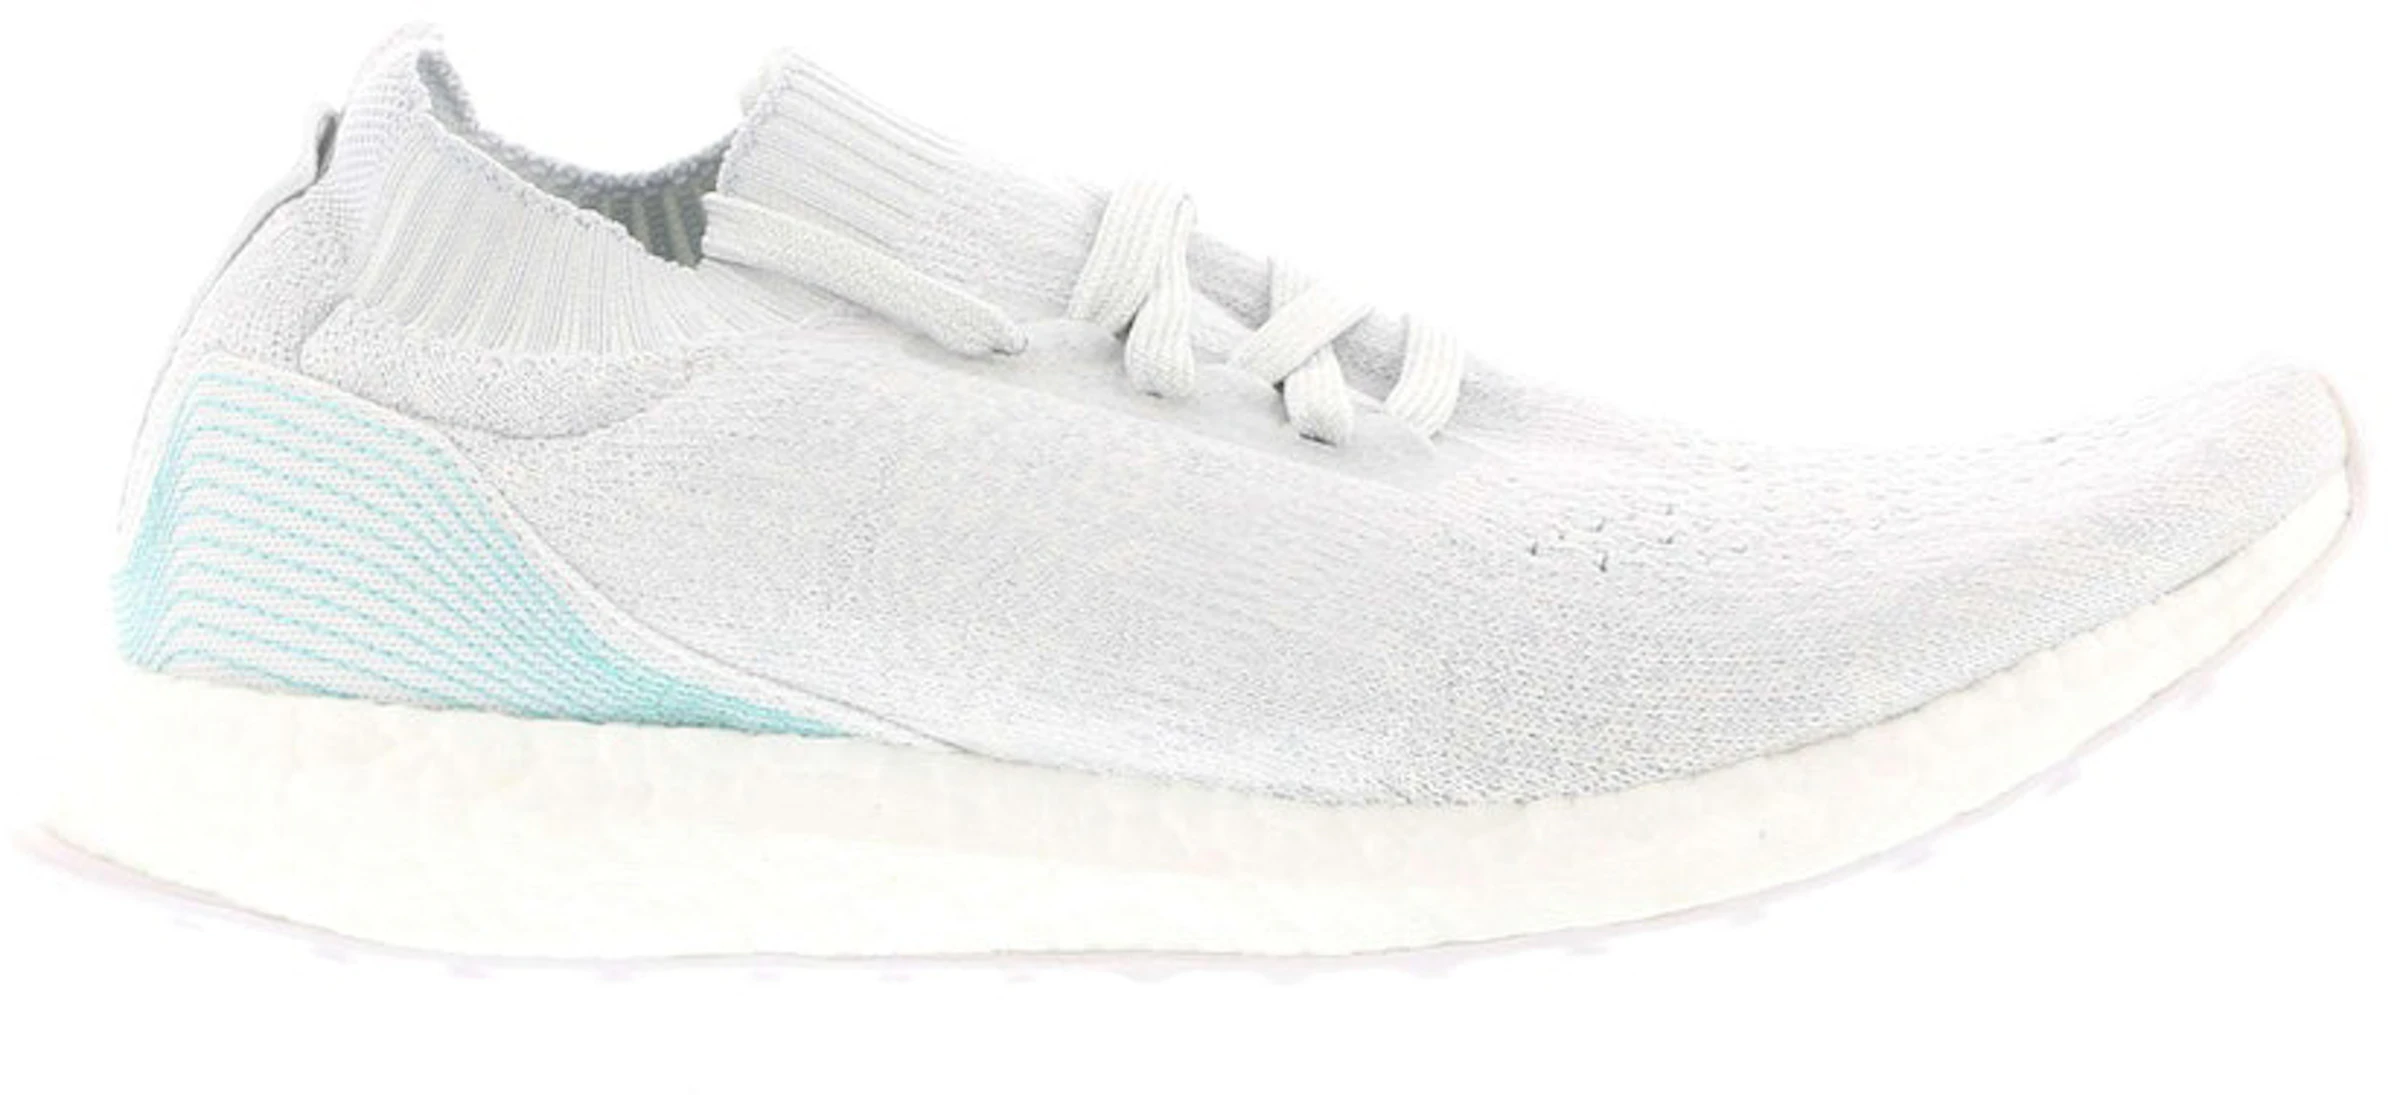 adidas Boost Uncaged Parley BB4073 -